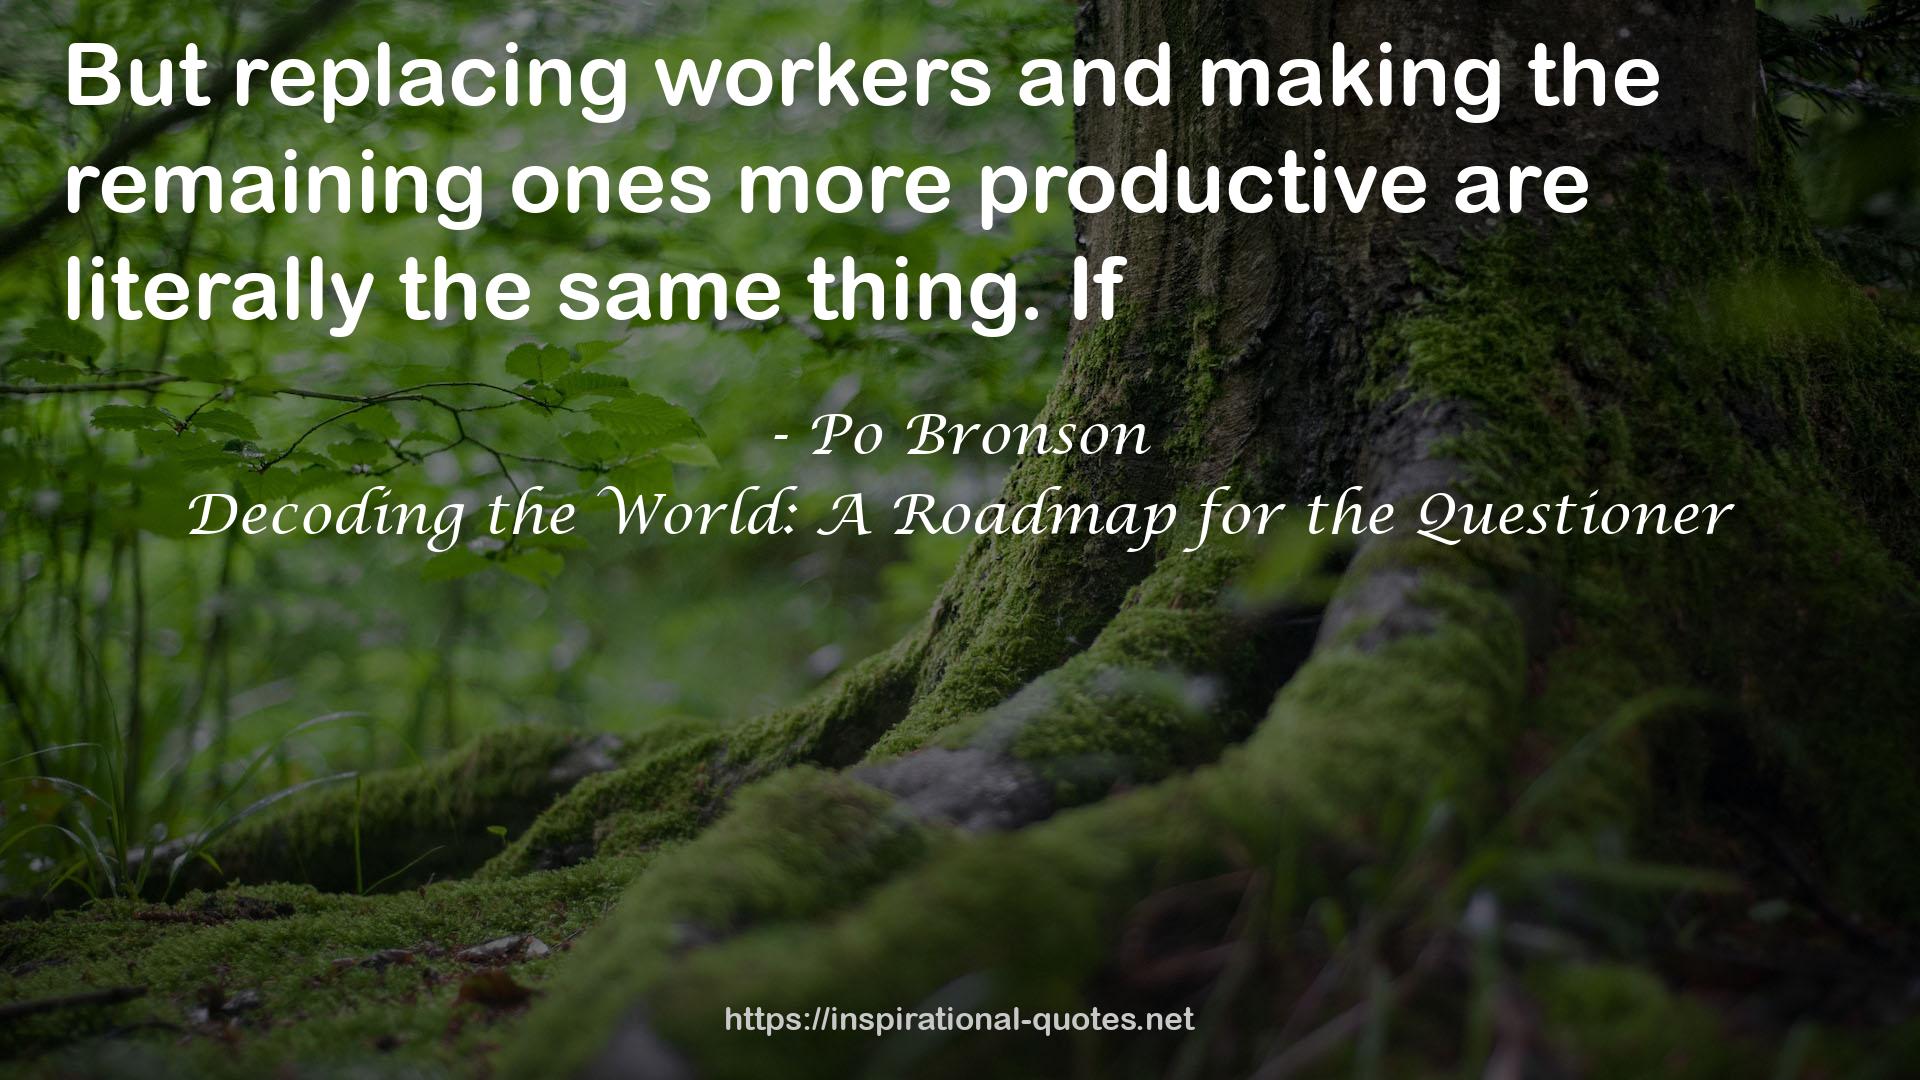 Decoding the World: A Roadmap for the Questioner QUOTES